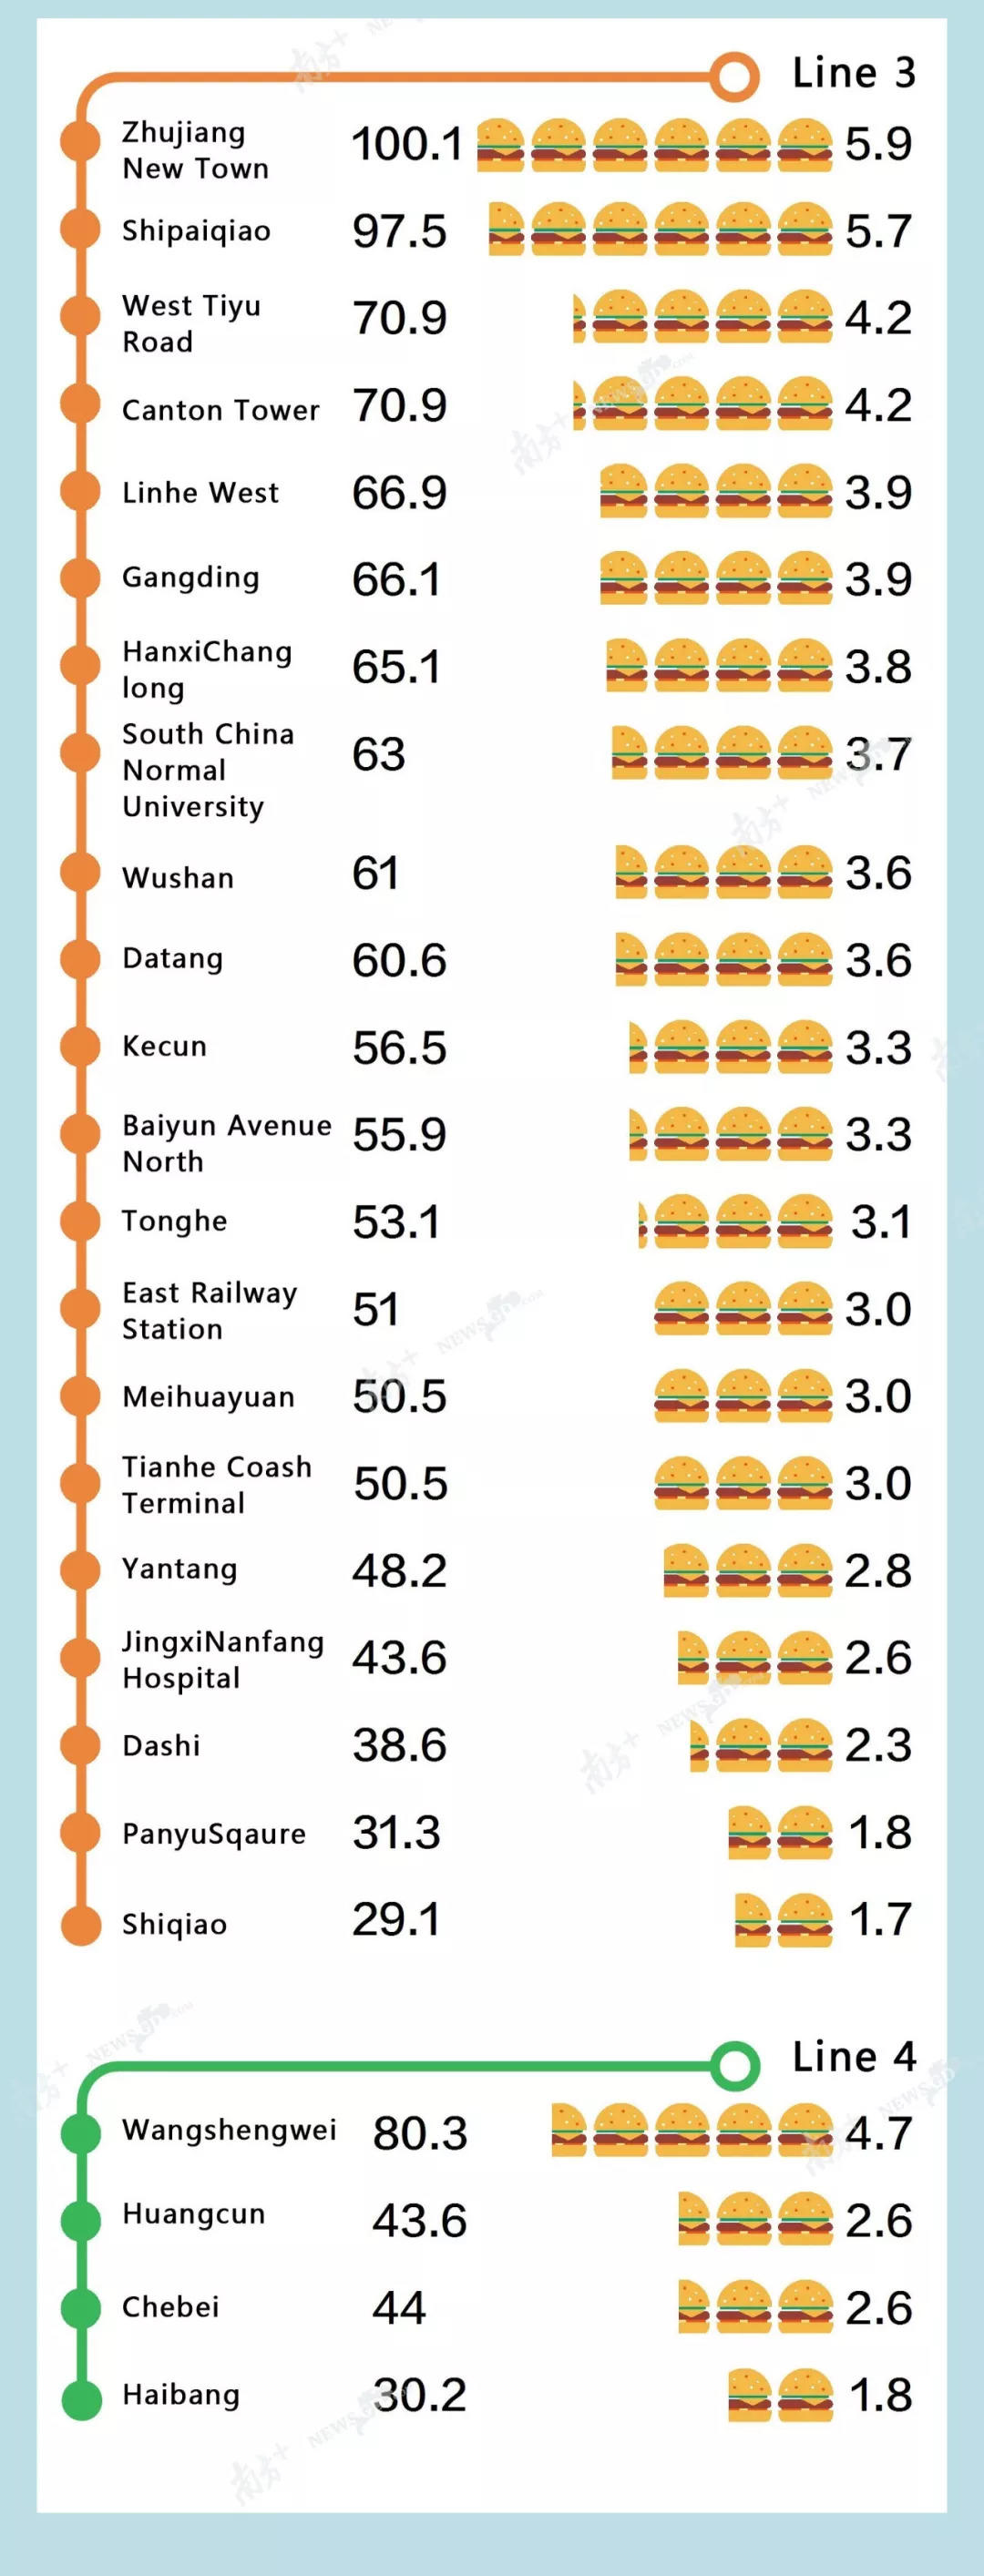 monthly rent in china = how many big macs?